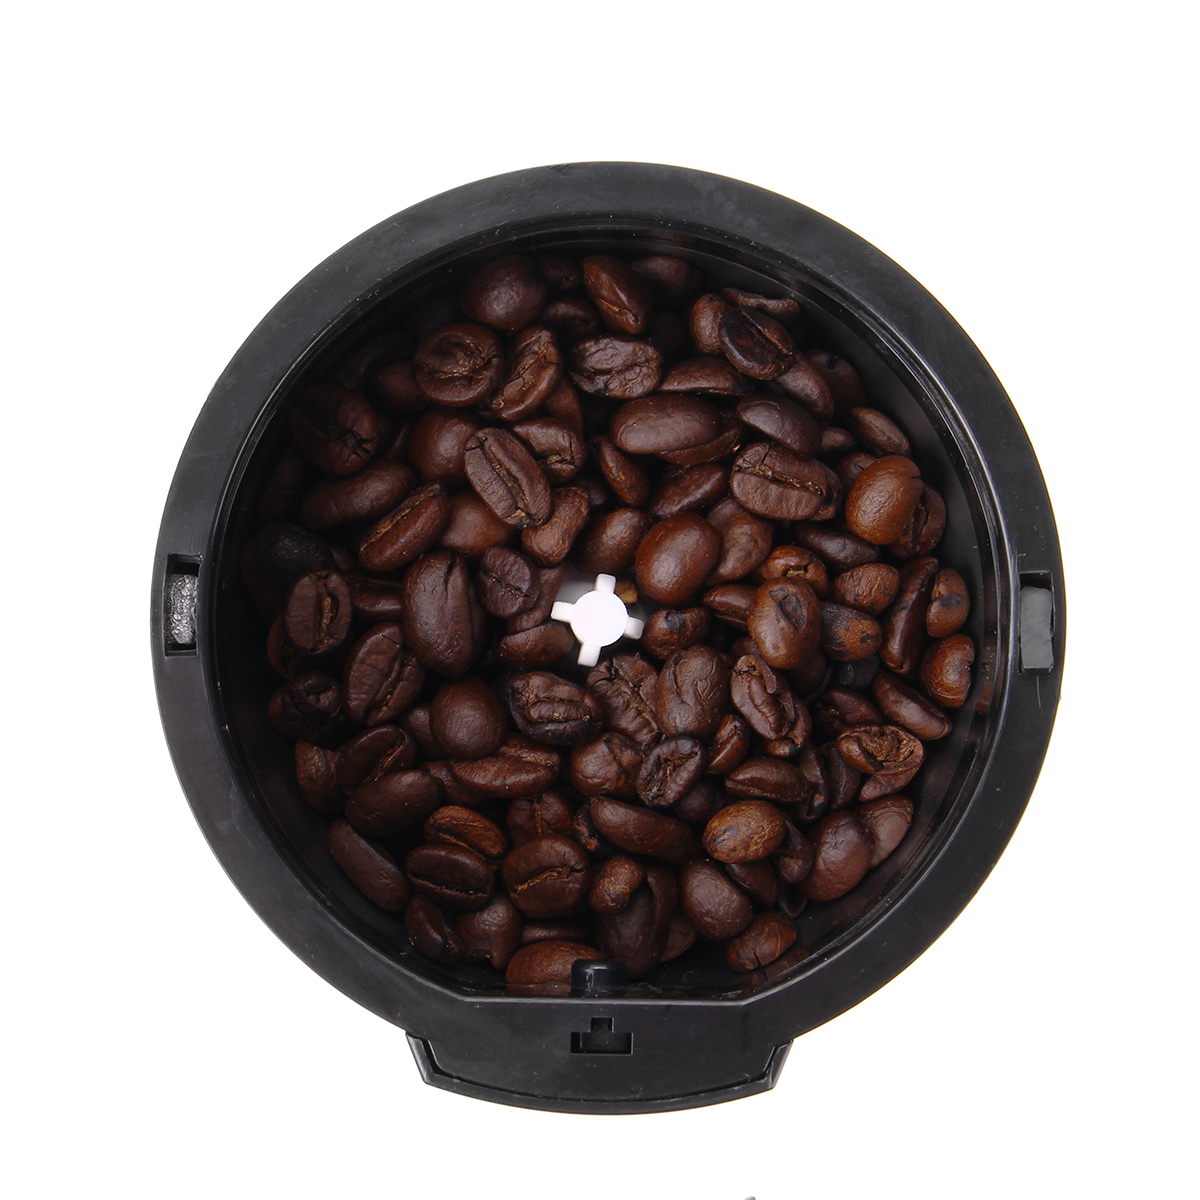 Portable-Electric-Coffee-Grinder-Beans-Nuts-Milling-Grinding-Machine-1597658